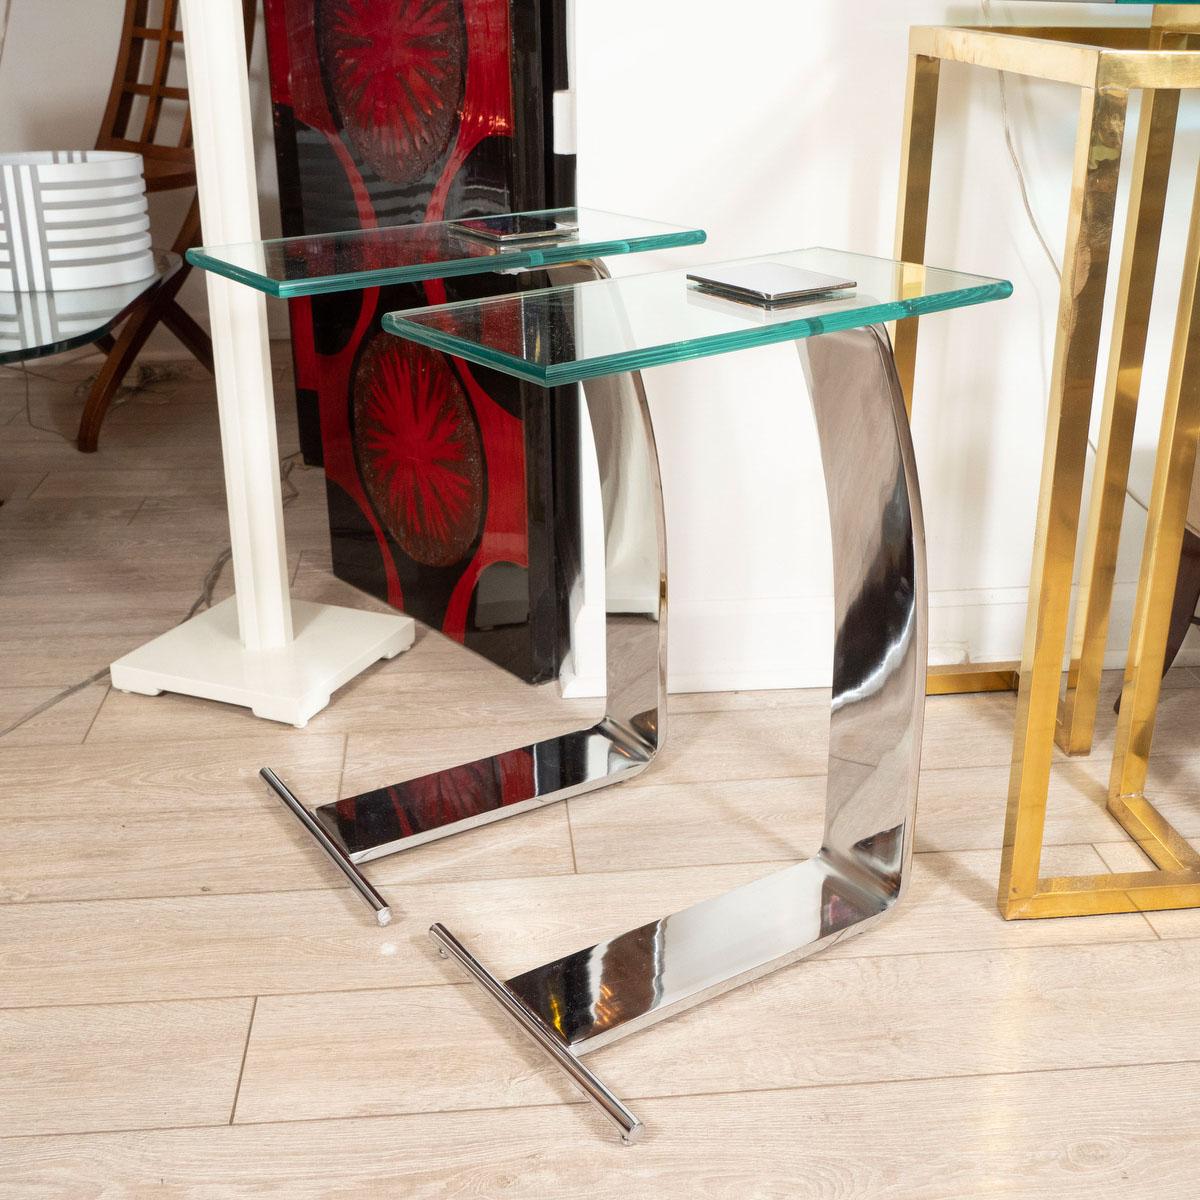 Pair of chrome side tables with glass tops. Model #431 by Marty Smith for Design Institute of America.